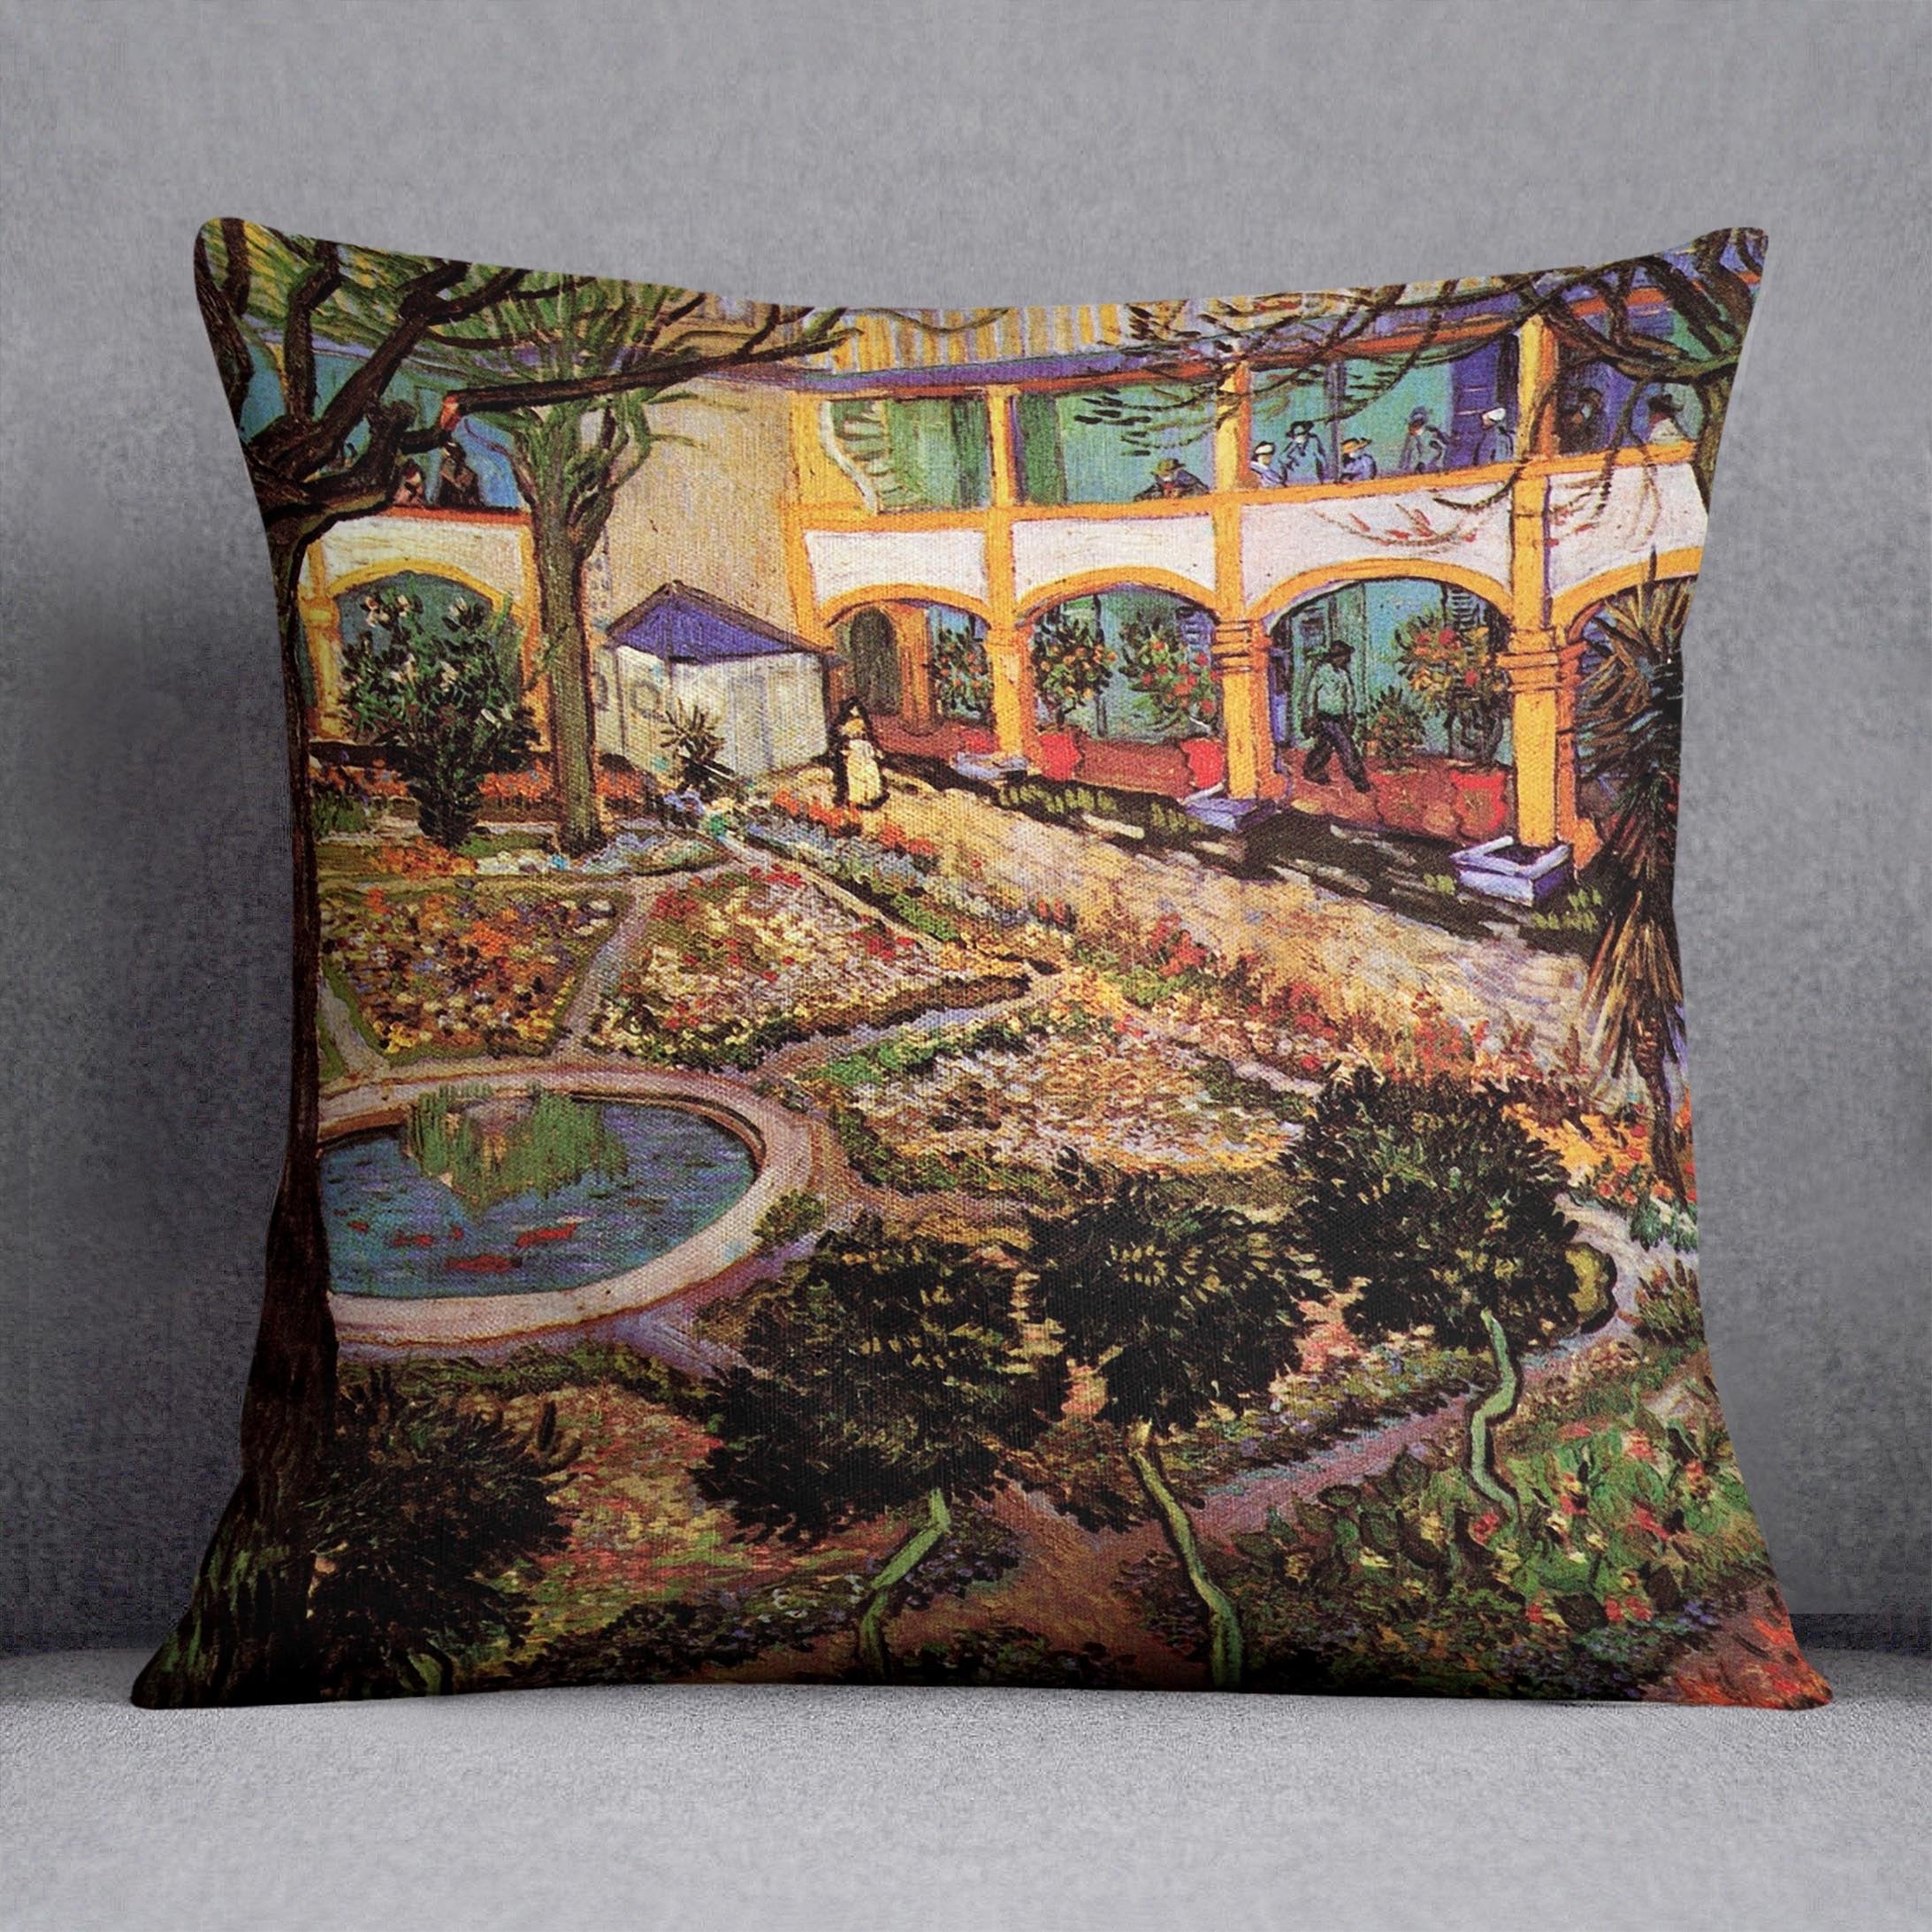 The Courtyard of the Hospital at Arles by Van Gogh Throw Pillow